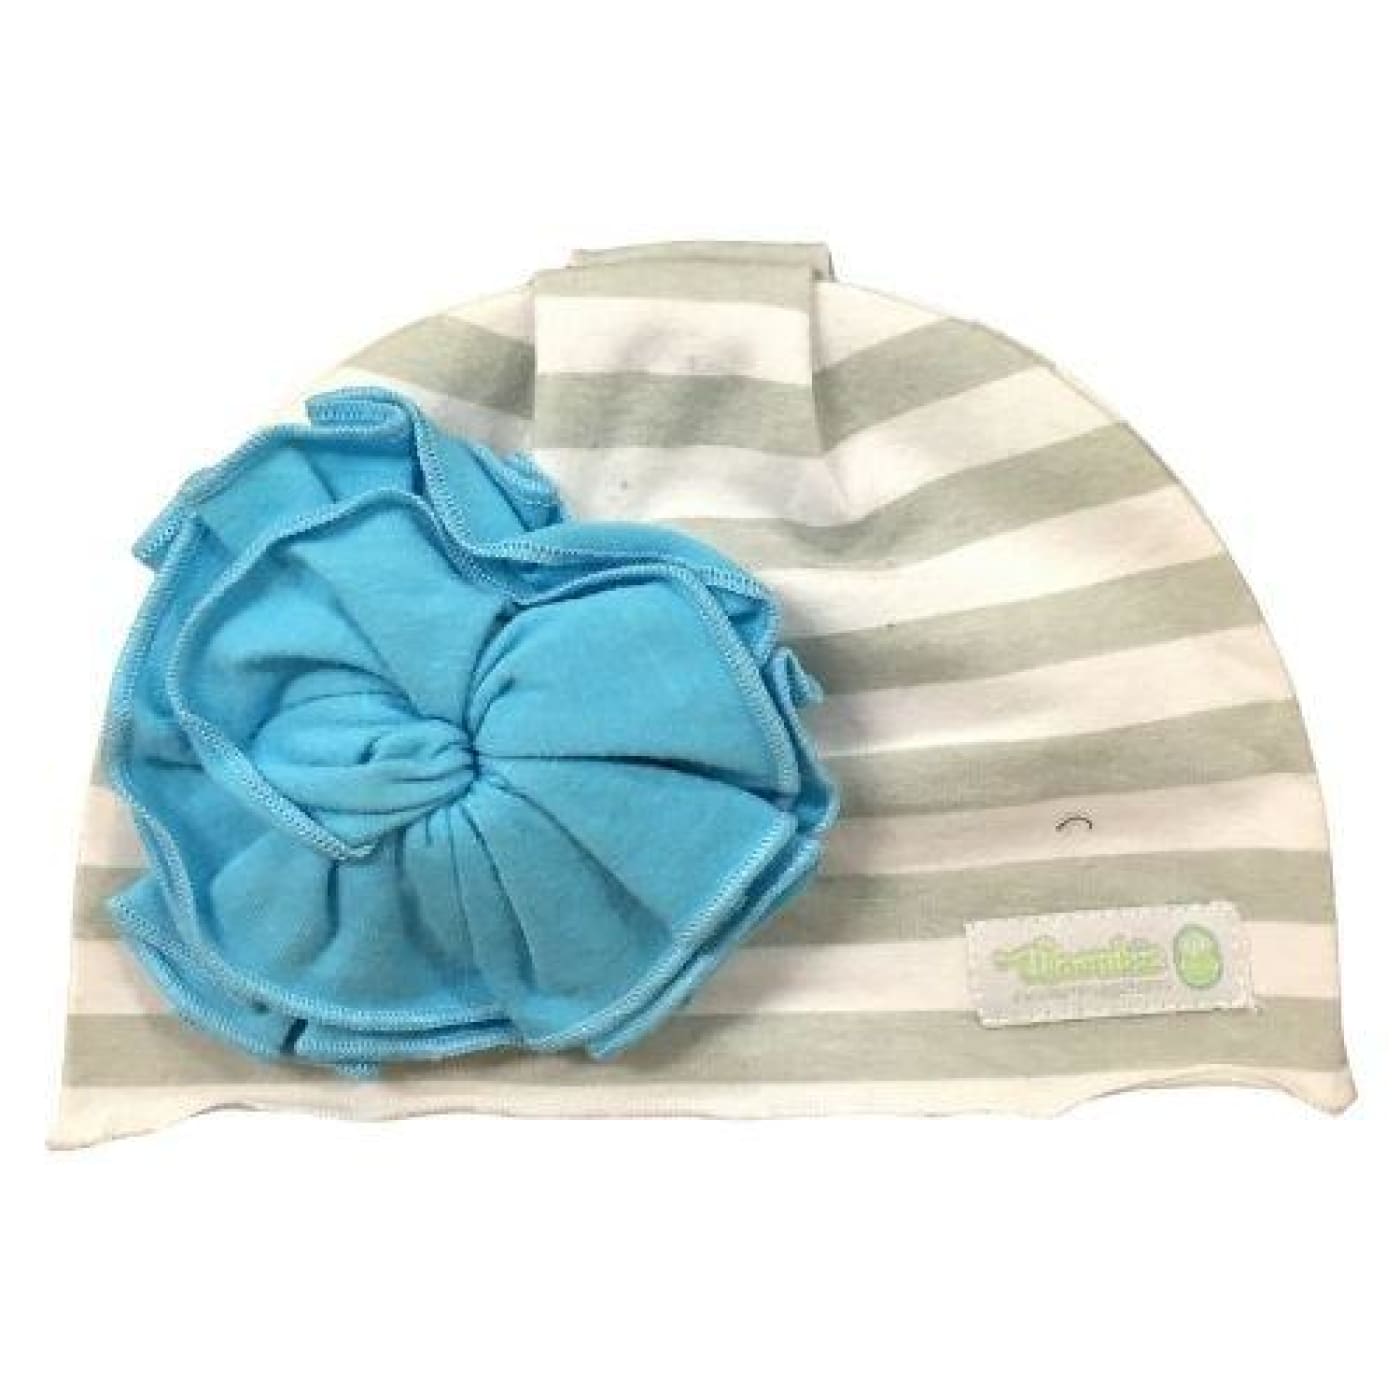 Woombie Flower Aqua Beanie 0-6M - 0-6m / Grey/White Striped - BABY & TODDLER CLOTHING - BEANIES/HATS